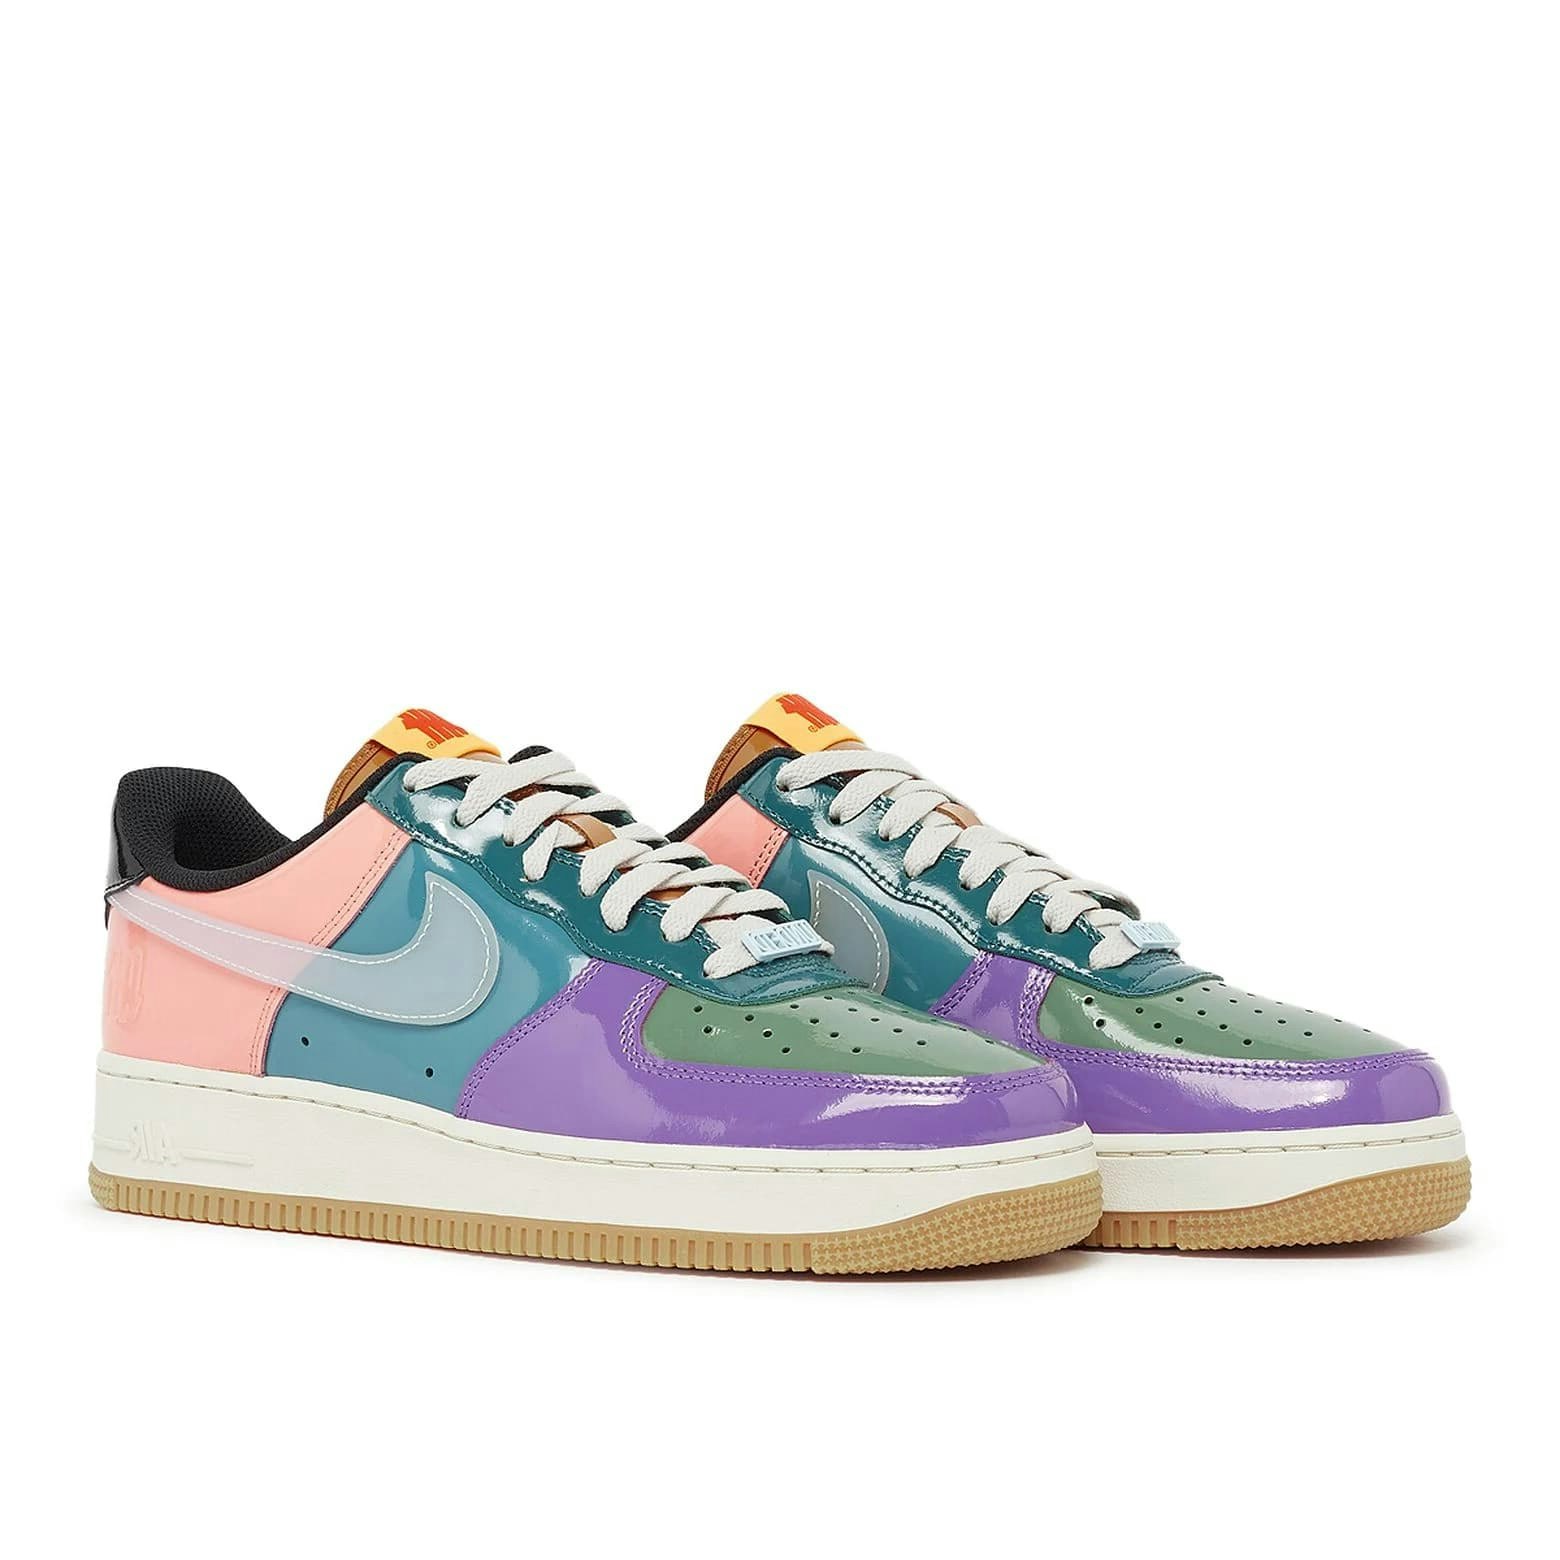 Undefeated x Nike Air Force 1 Low "Celestine Blue"